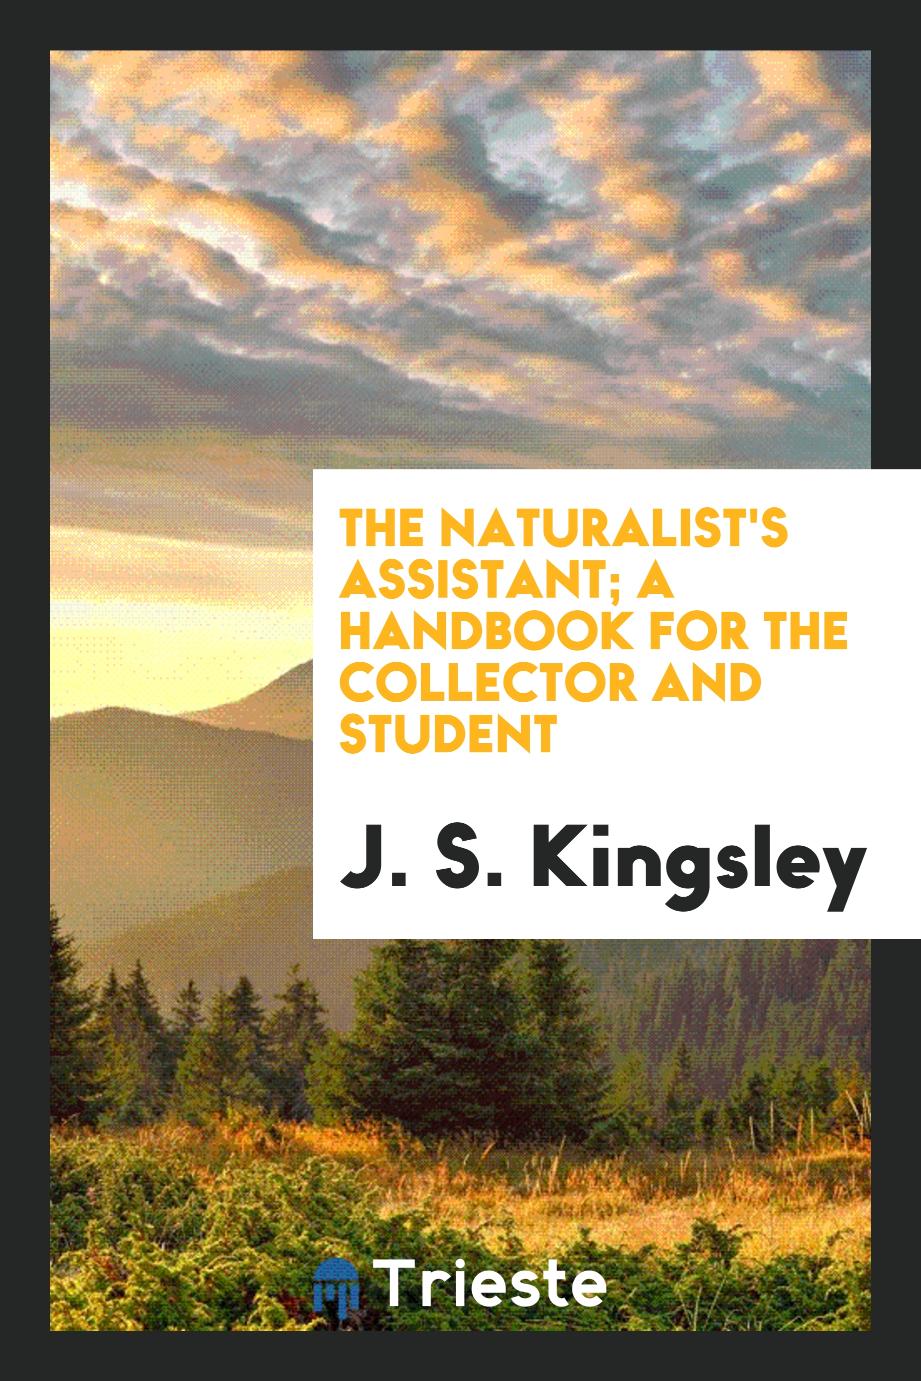 The naturalist's assistant; a handbook for the collector and student